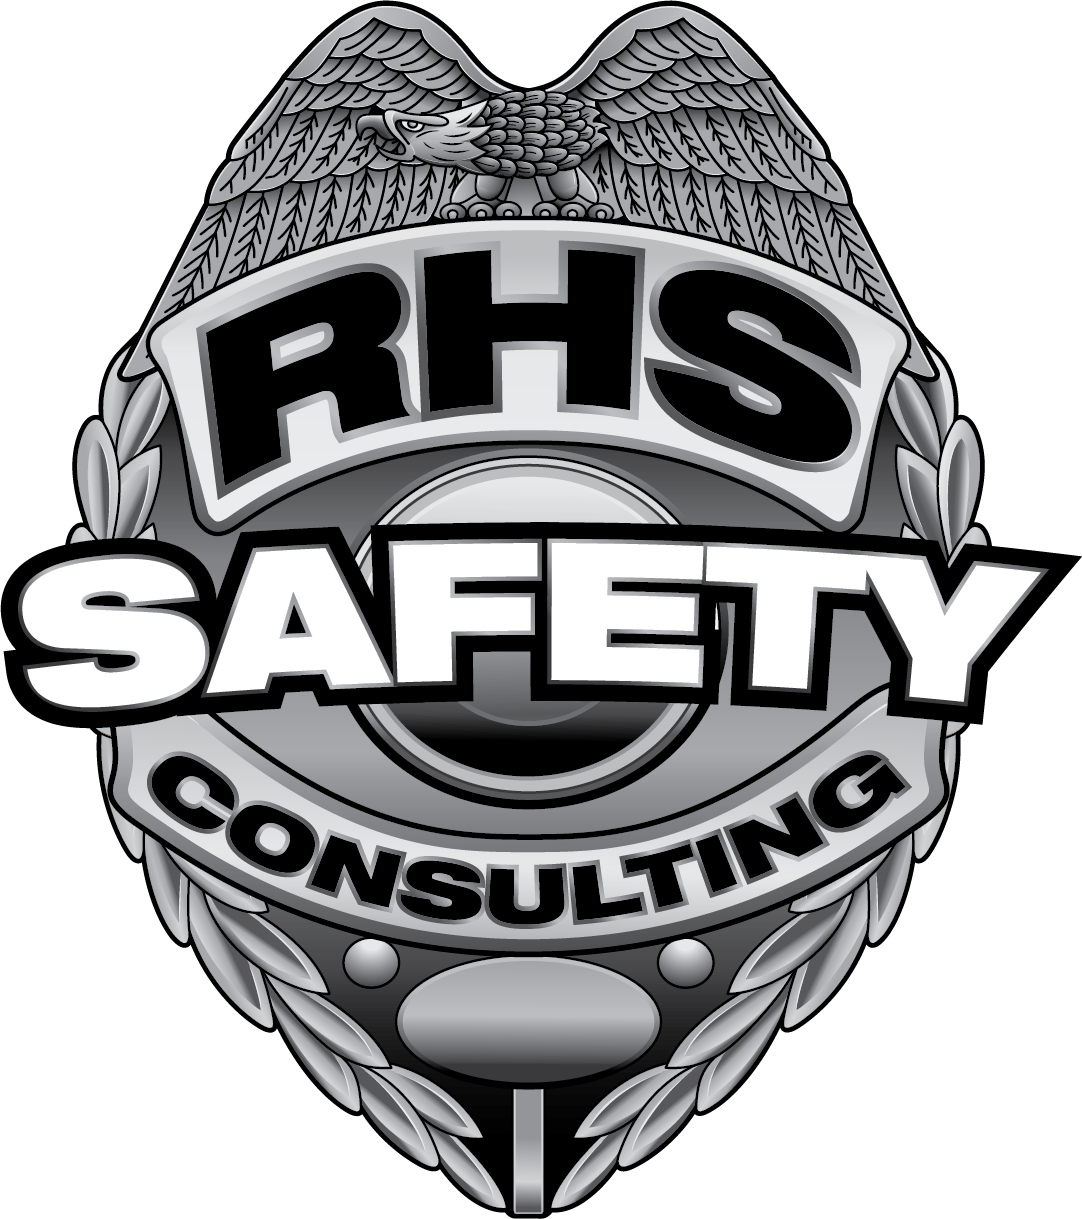 RHS Safety Consulting